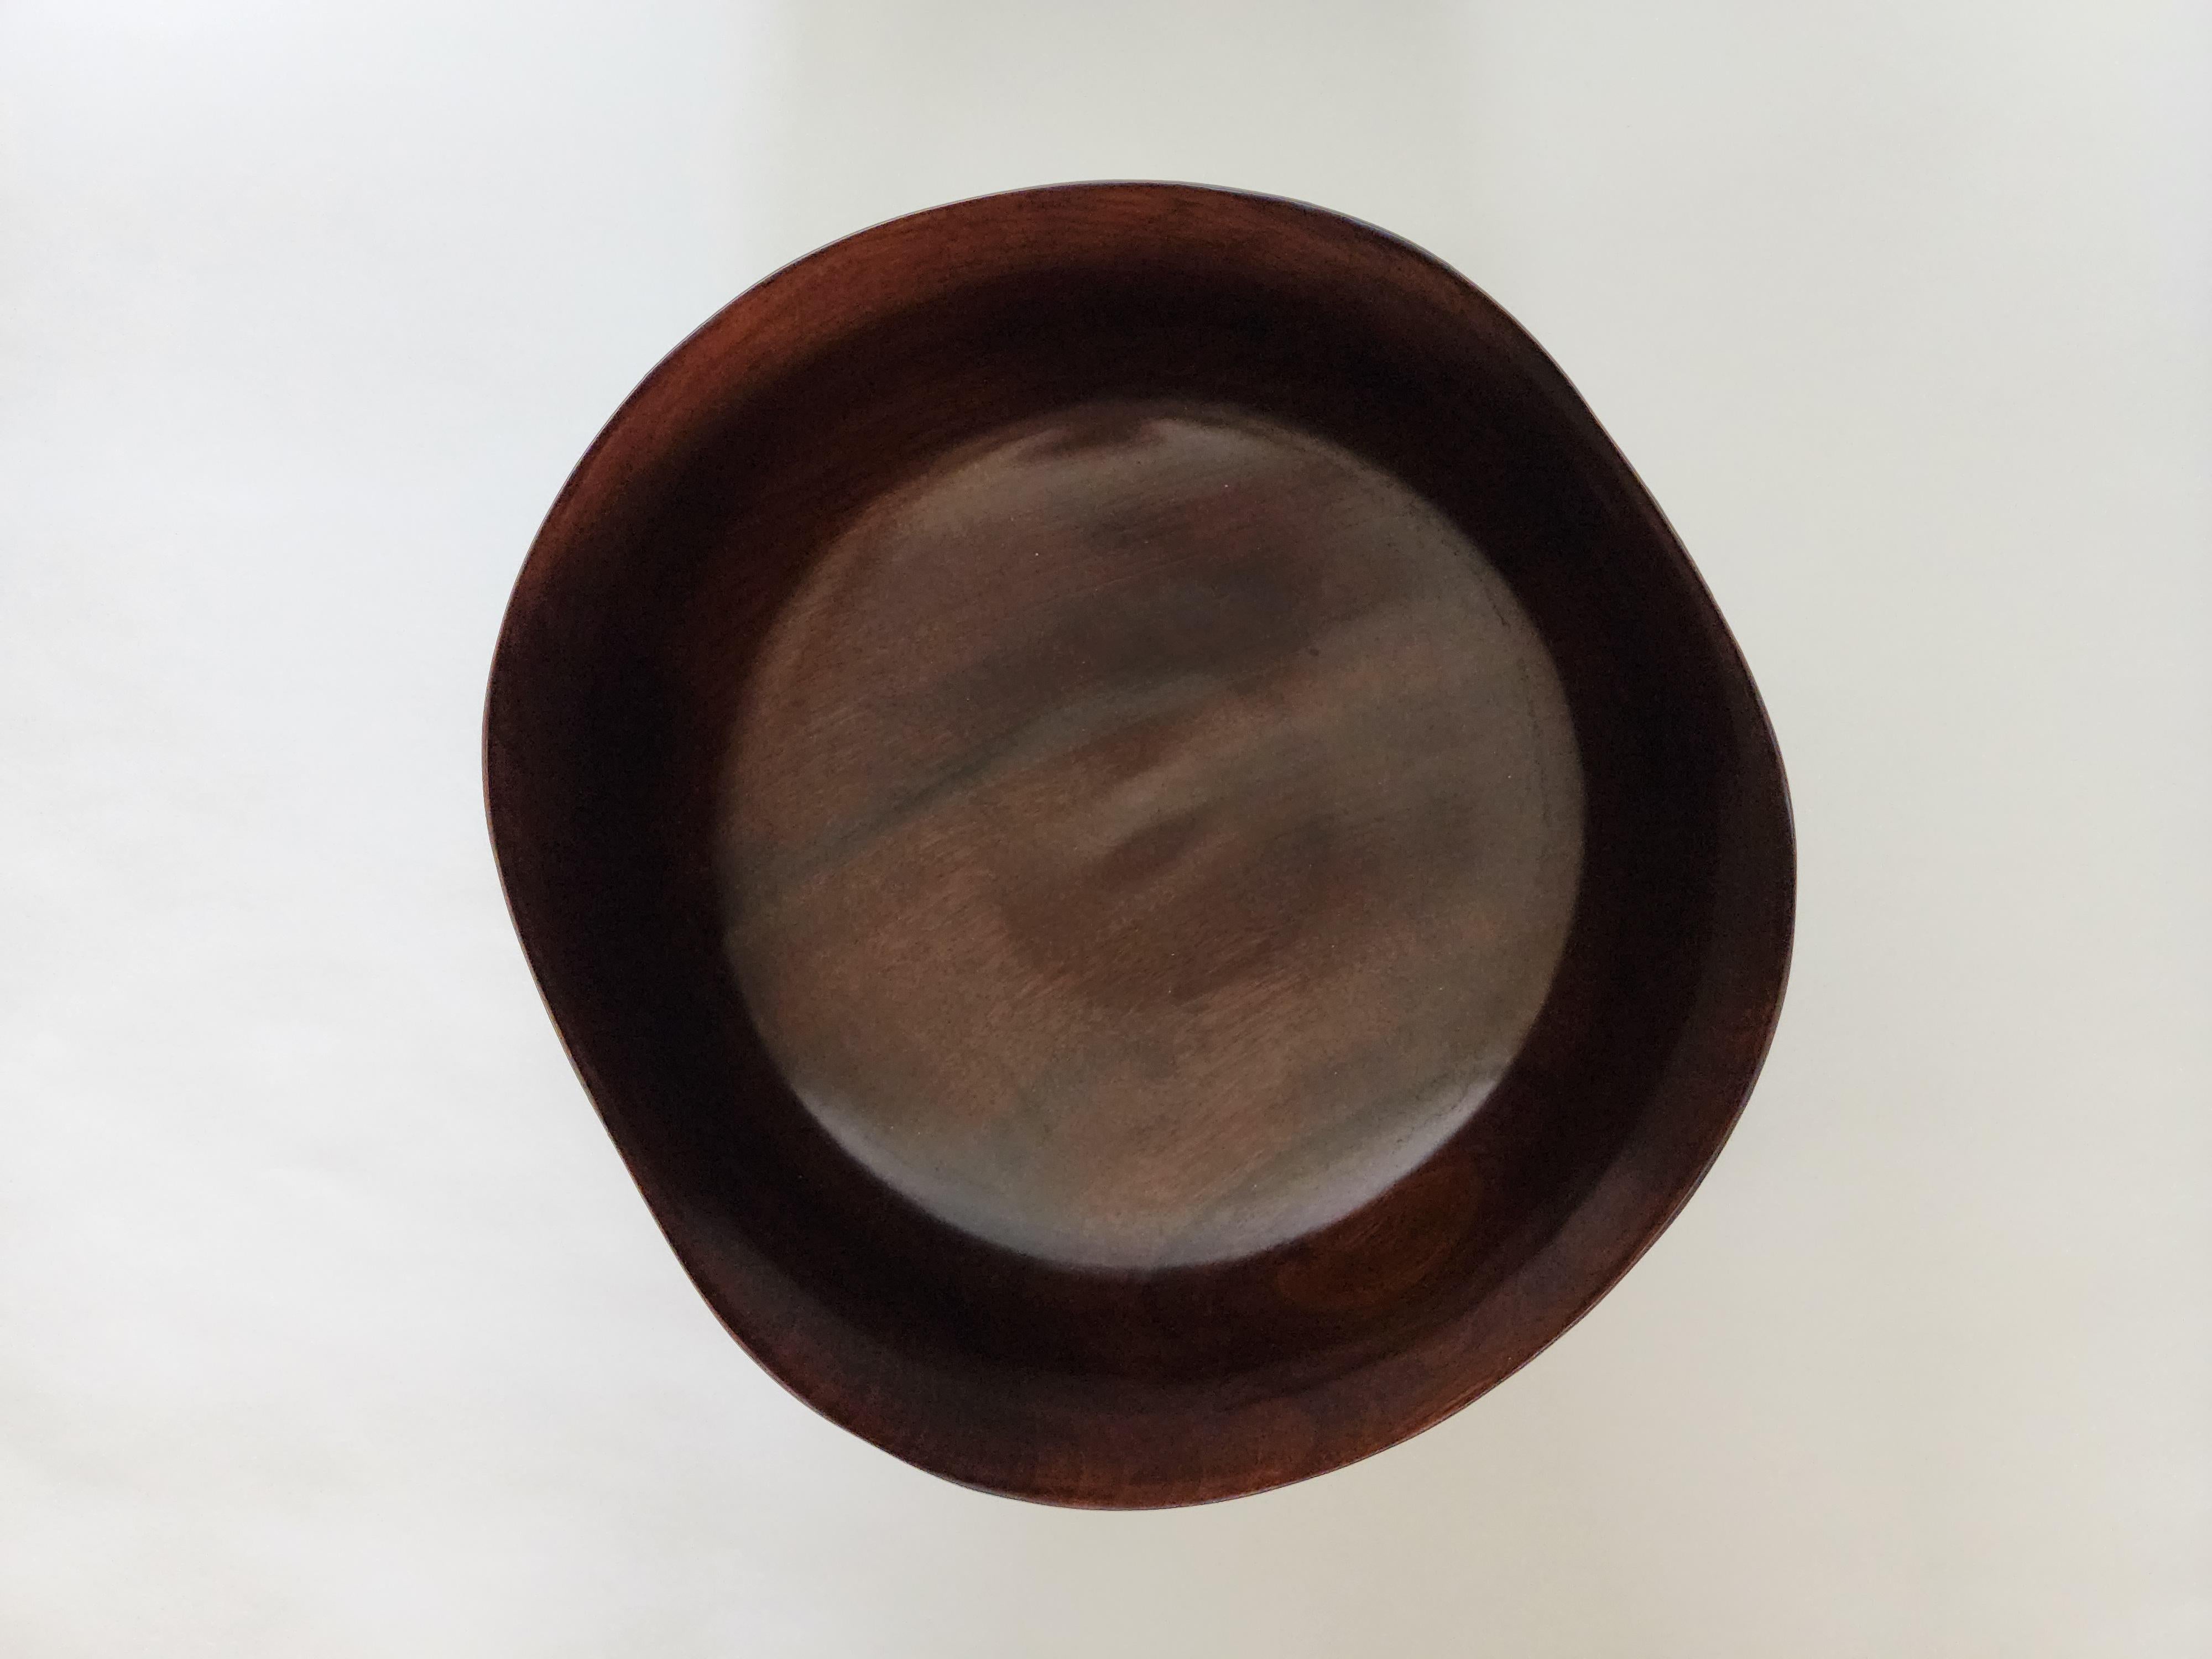 Hand-Crafted Contemporary The Earth's Language 03 bowl by Sukkeun Kang For Sale